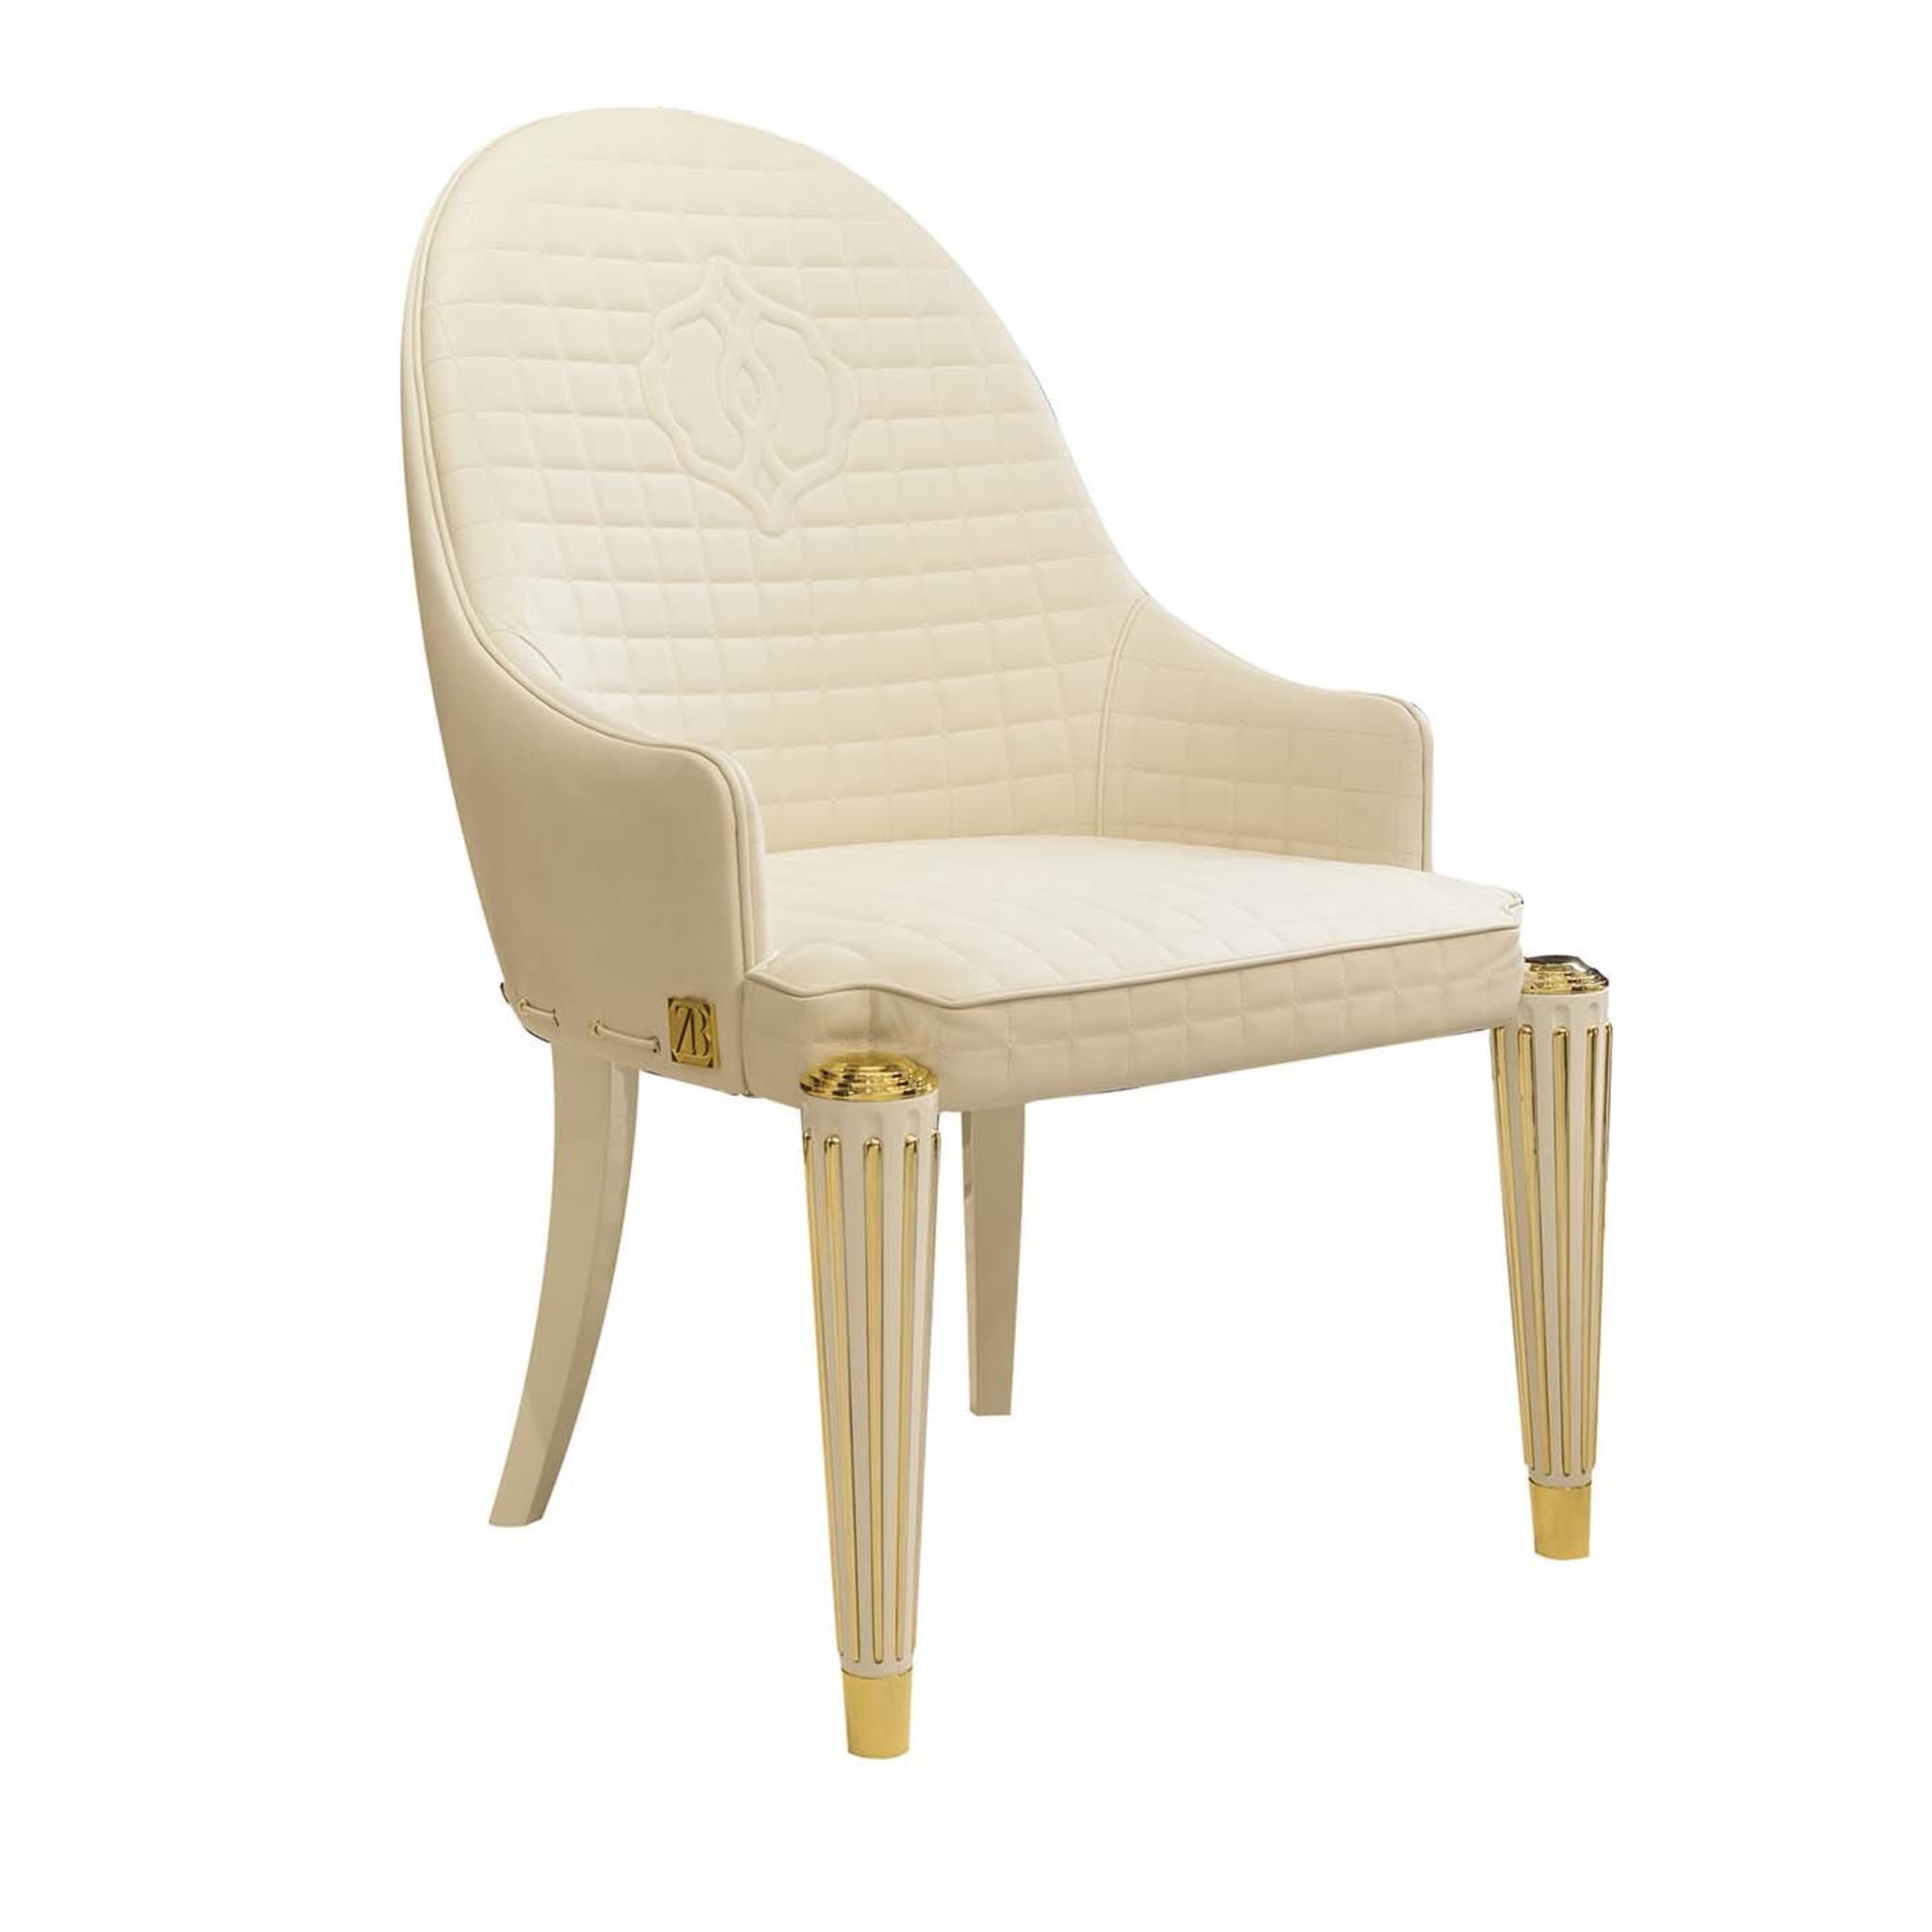 Ophelia Dining Chair with Armrests - Main view